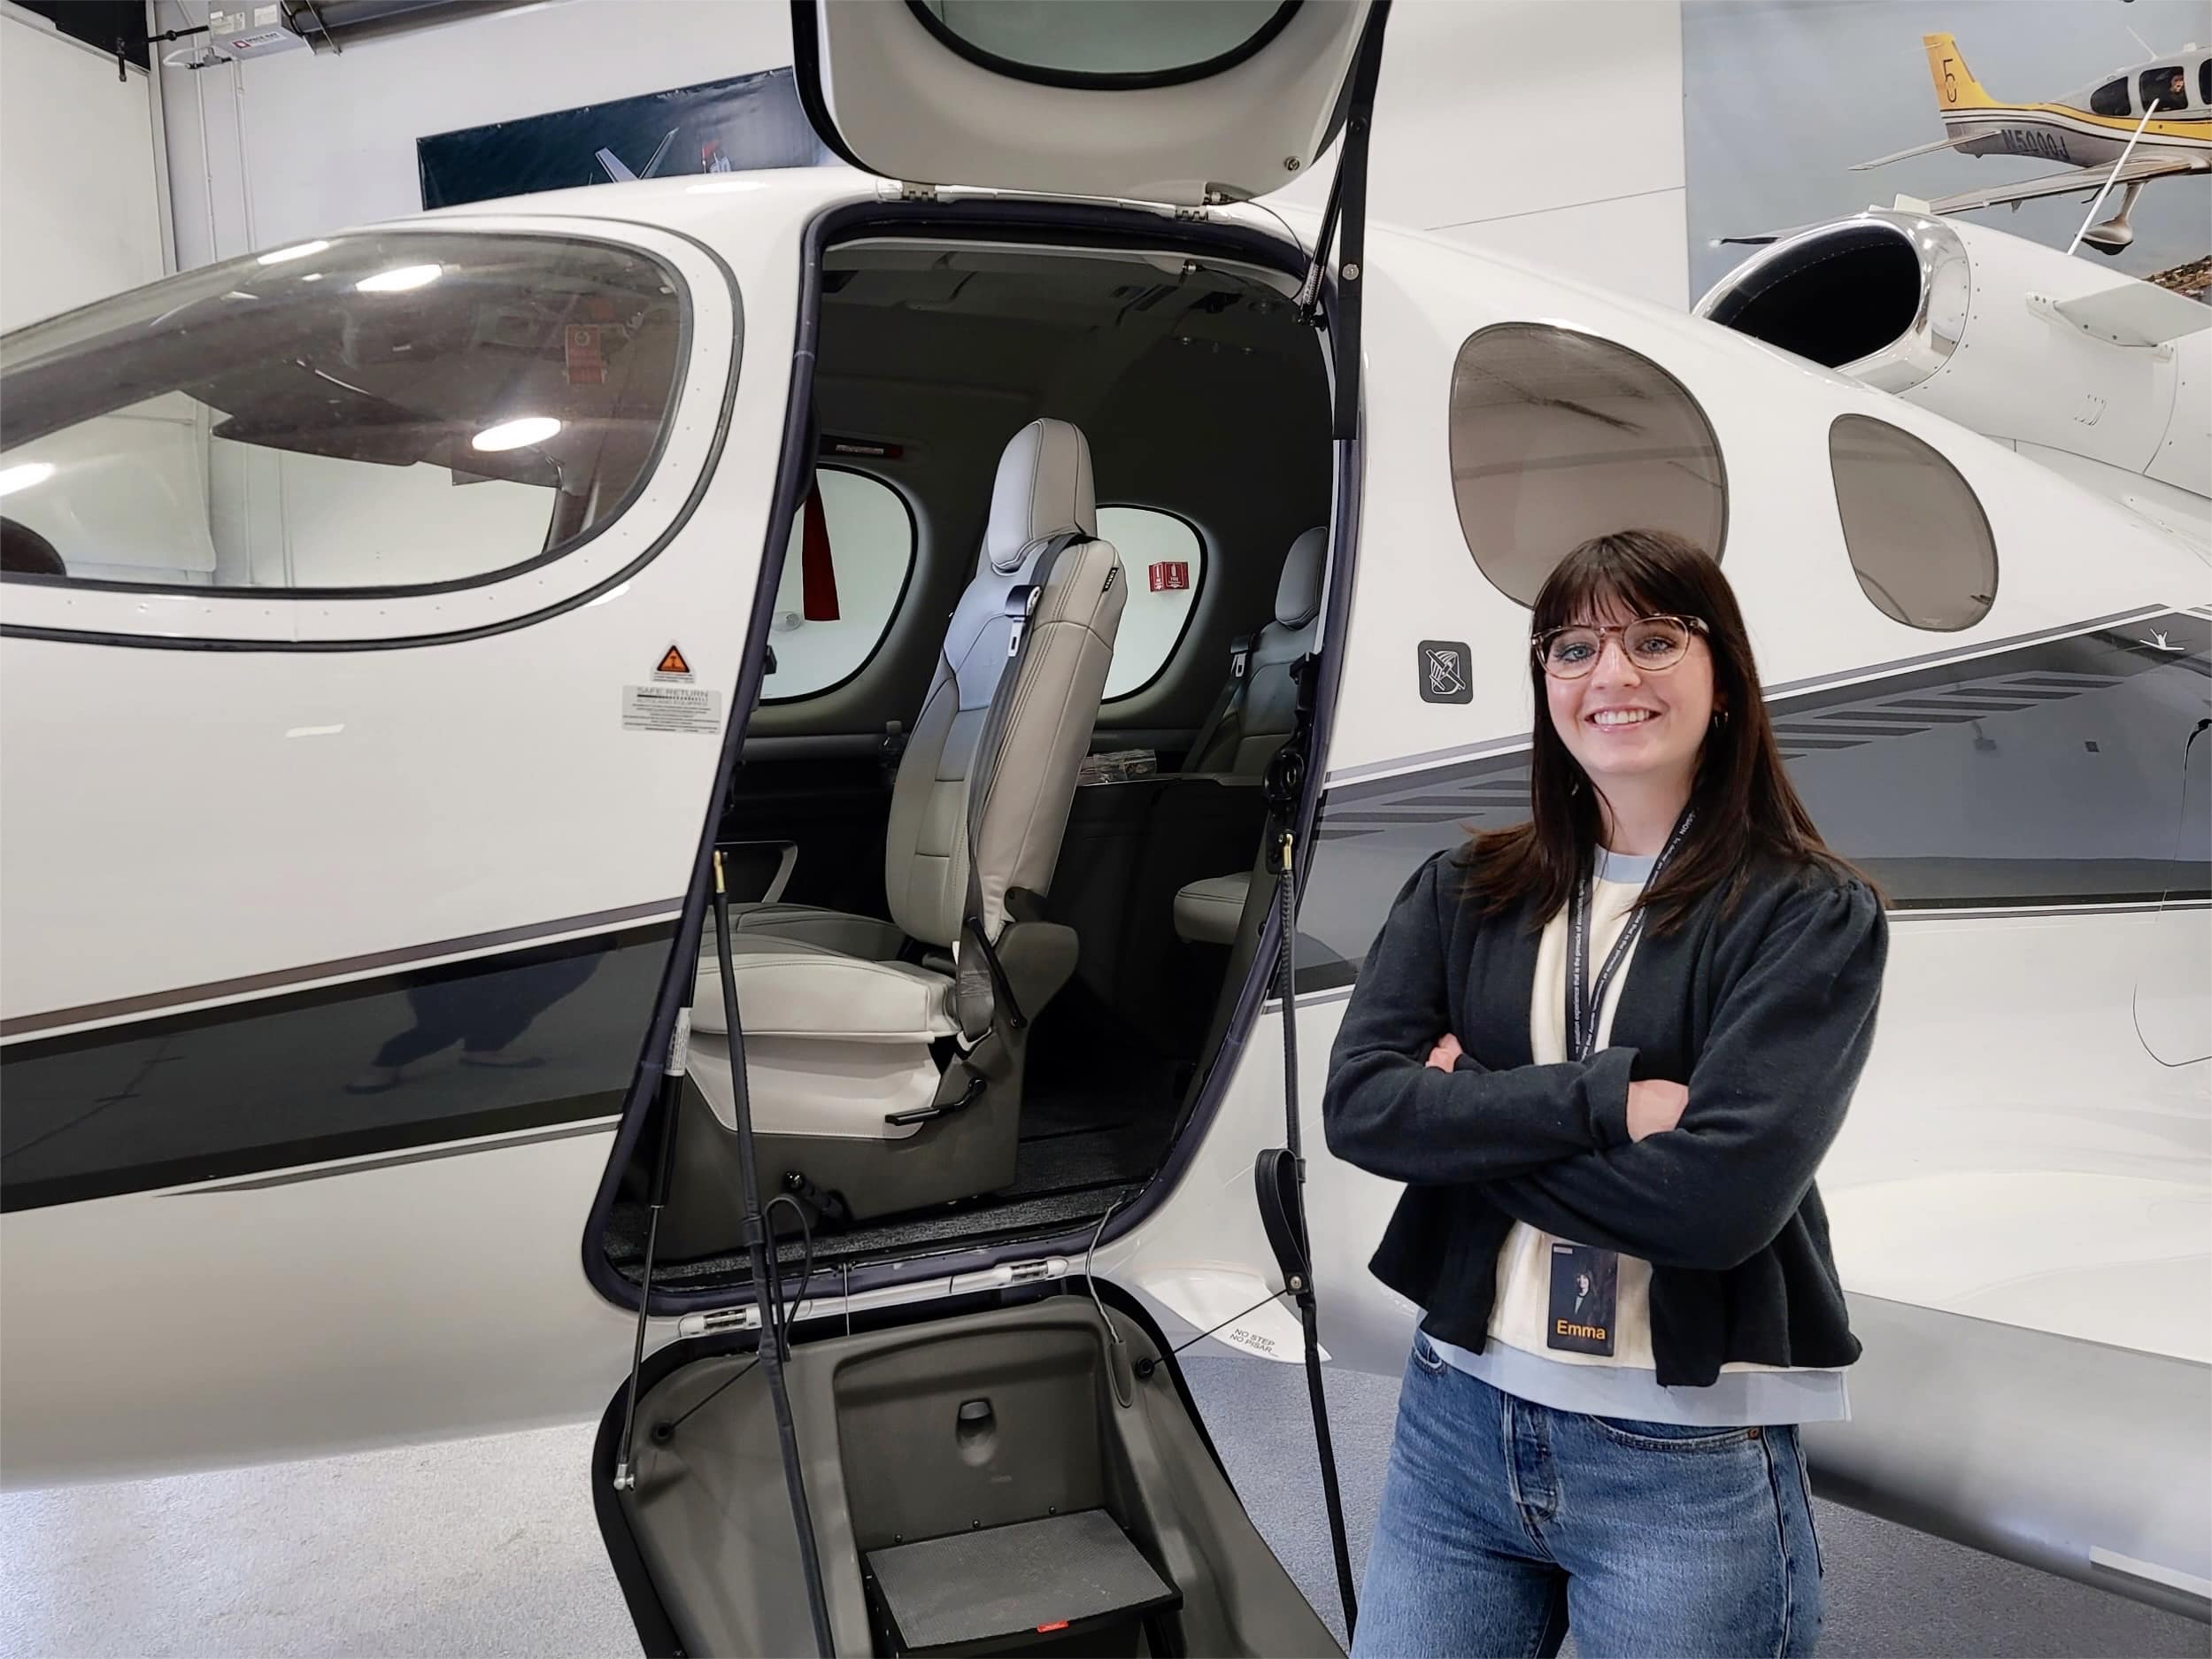 Emma Rasmussen standing in front of a Cirrus Aircraft in Black Jacket